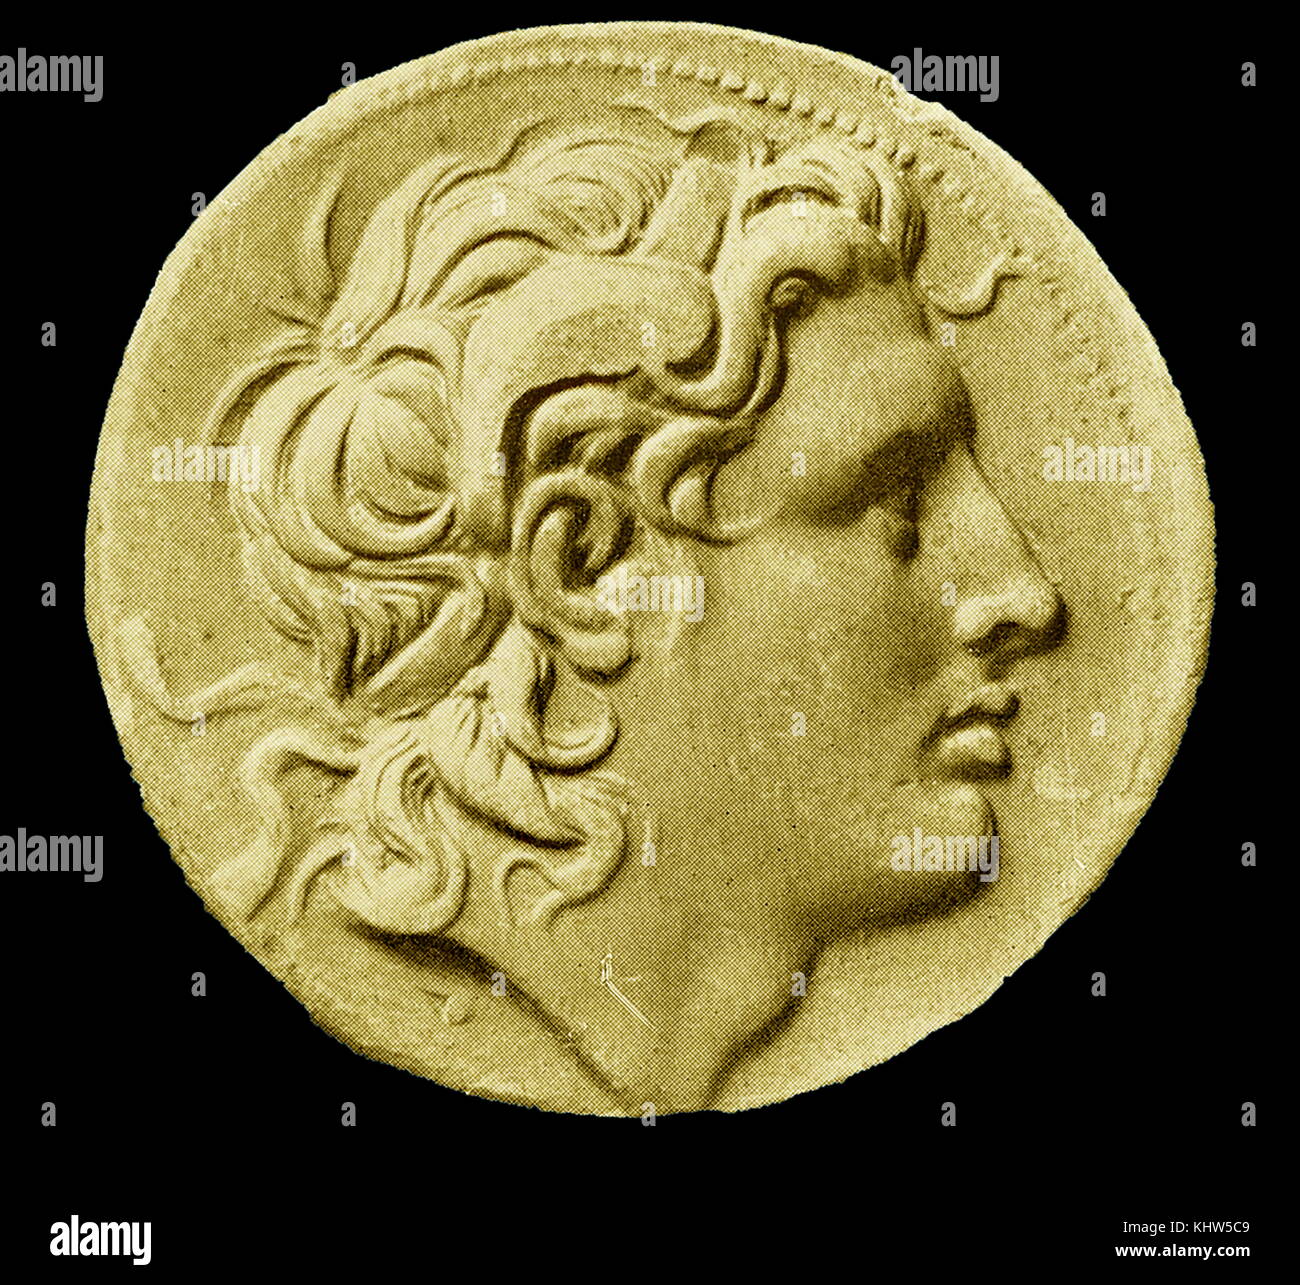 Portrait of Alexander the Great as 'Lord of the Two Horns'. Alexander III of Macedon (356 BC - 323 BC) a King of the Ancient Greek kingdom of Macedon and a member of the Agread dynasty. Dated 4th Century BC Stock Photo